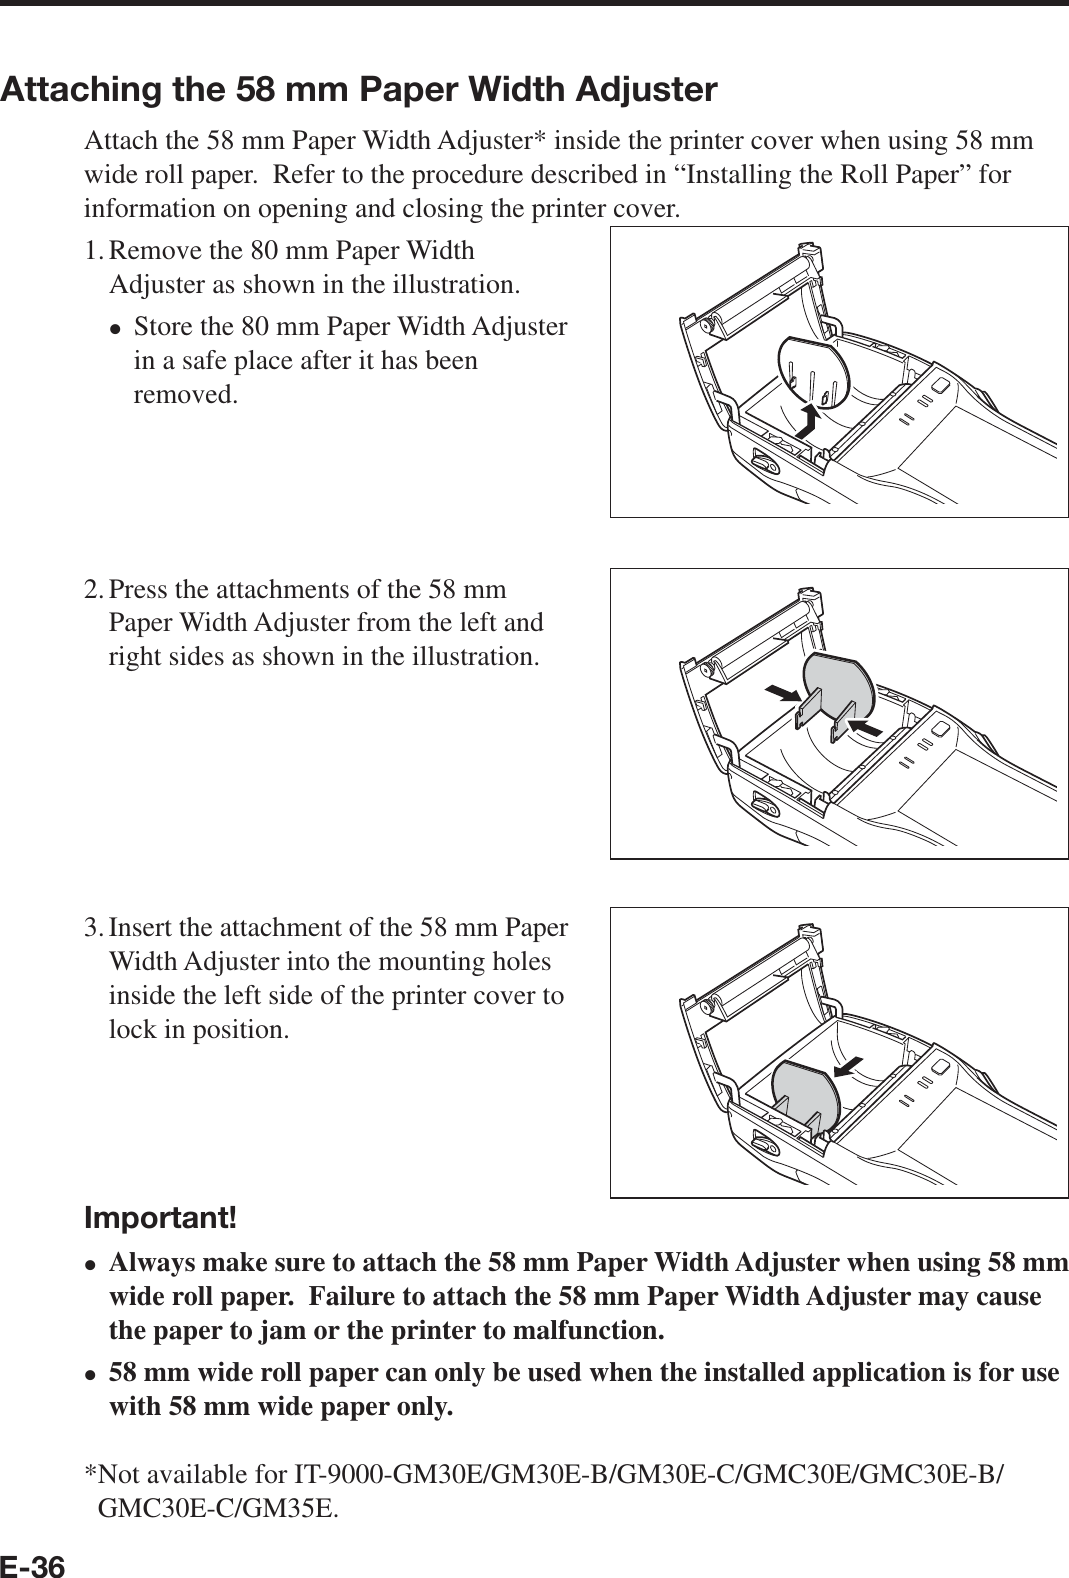 E-36Attaching the 58 mm Paper Width AdjusterAttach the 58 mm Paper Width Adjuster* inside the printer cover when using 58 mm wide roll paper.  Refer to the procedure described in “Installing the Roll Paper” for information on opening and closing the printer cover.1. Remove the 80 mm Paper Width Adjuster as shown in the illustration.Store the 80 mm Paper Width Adjuster in a safe place after it has been removed.2. Press the attachments of the 58 mm Paper Width Adjuster from the left and right sides as shown in the illustration.3. Insert the attachment of the 58 mm Paper Width Adjuster into the mounting holes inside the left side of the printer cover to lock in position.Important!Always make sure to attach the 58 mm Paper Width Adjuster when using 58 mm wide roll paper.  Failure to attach the 58 mm Paper Width Adjuster may cause the paper to jam or the printer to malfunction.58 mm wide roll paper can only be used when the installed application is for use with 58 mm wide paper only.* Not available for IT-9000-GM30E/GM30E-B/GM30E-C/GMC30E/GMC30E-B/xxxGMC30E-C/GM35E. 